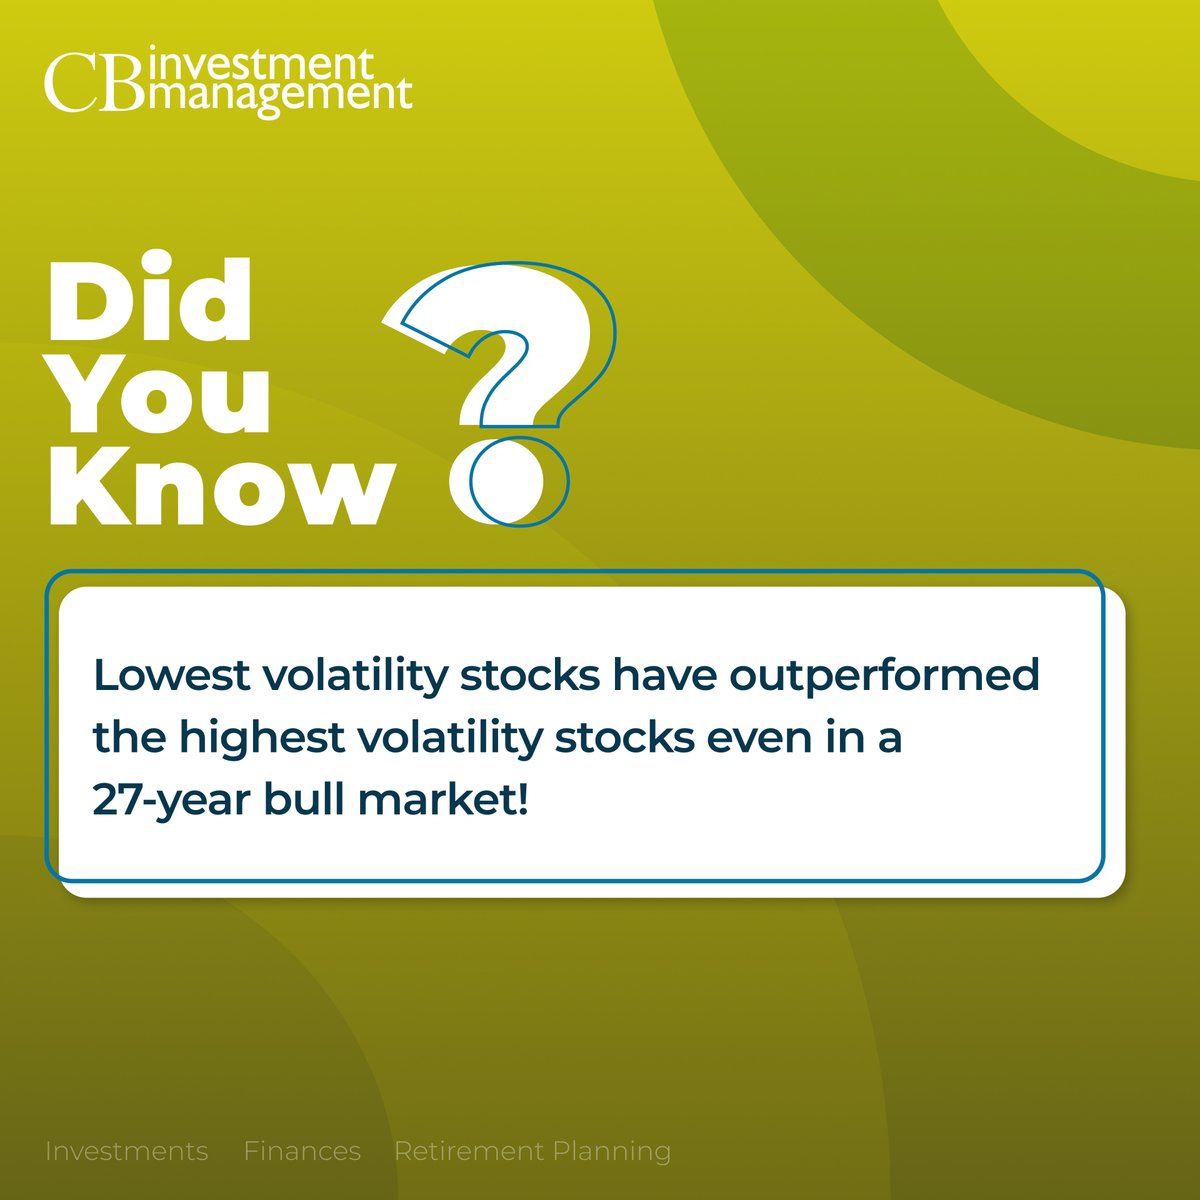 The widely adopted assumption that higher risk leads to higher returns is provably wrong just by examining the long term performance of low volatility stocks relative to high volatity stocks. Make sure you understand all the assumptions being made in your investment allocation.